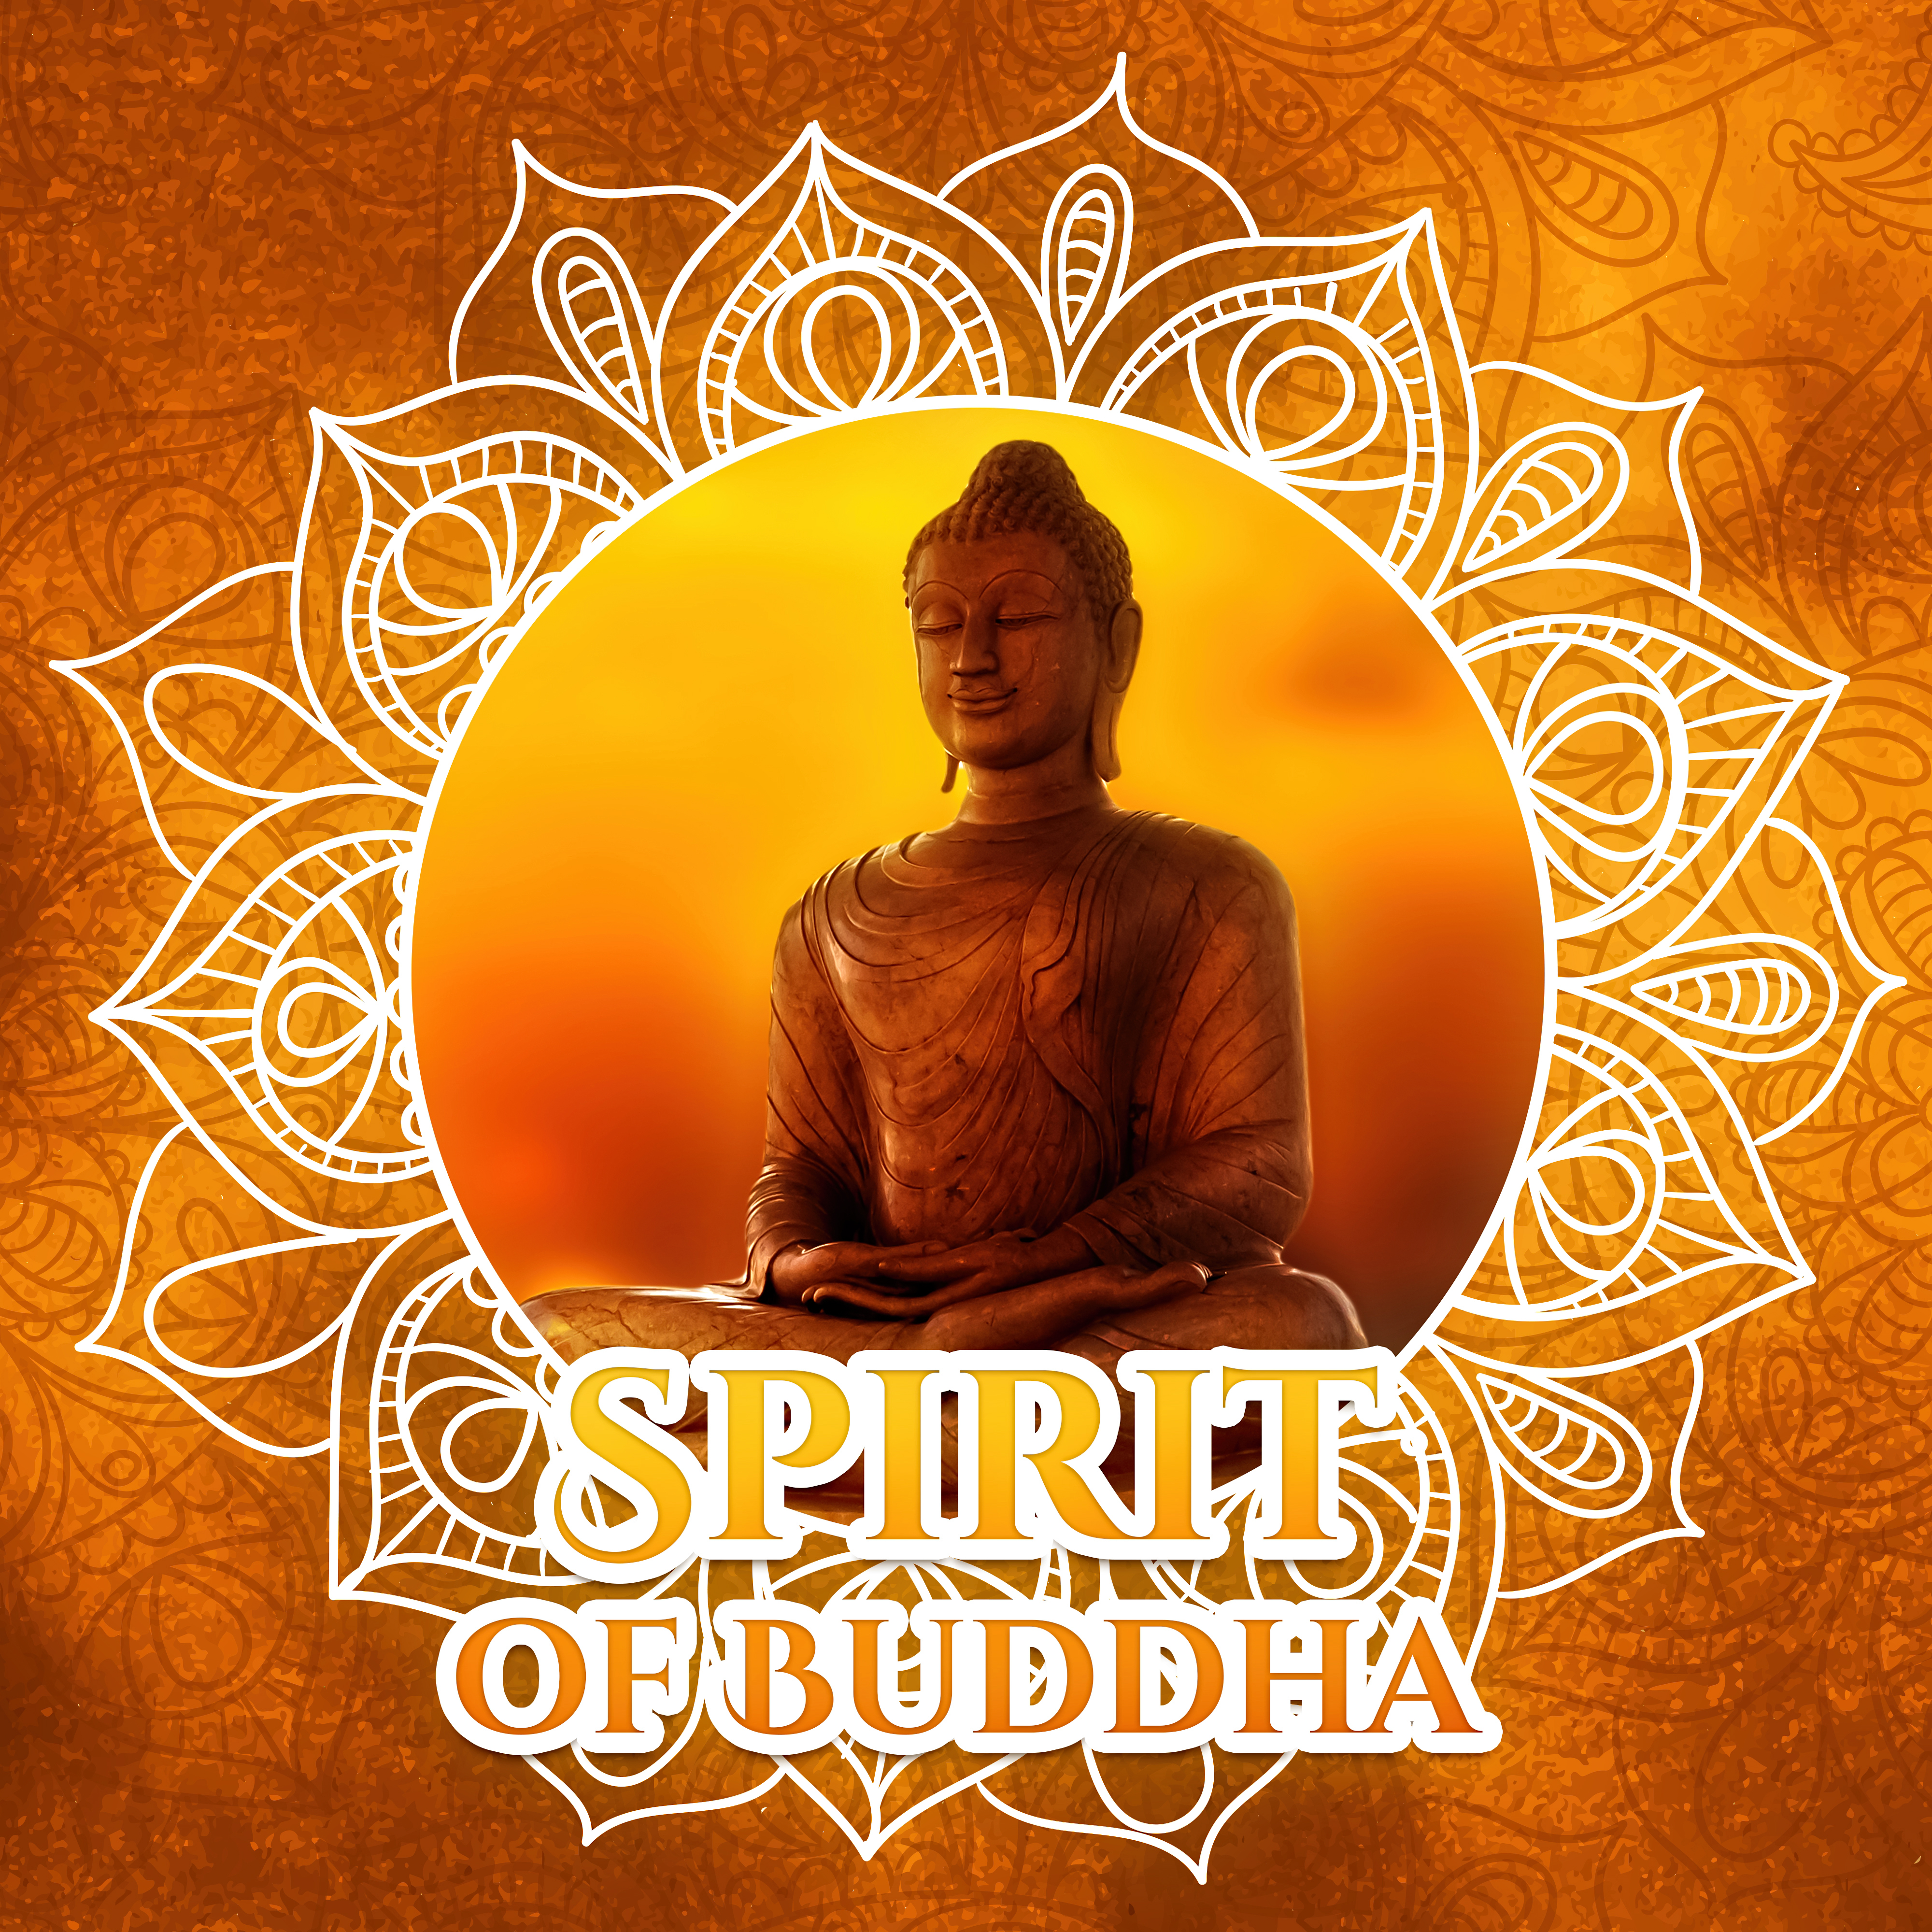 Spirit of Buddha - Science Concentration, Health for Body, Great-Being, Trained Body